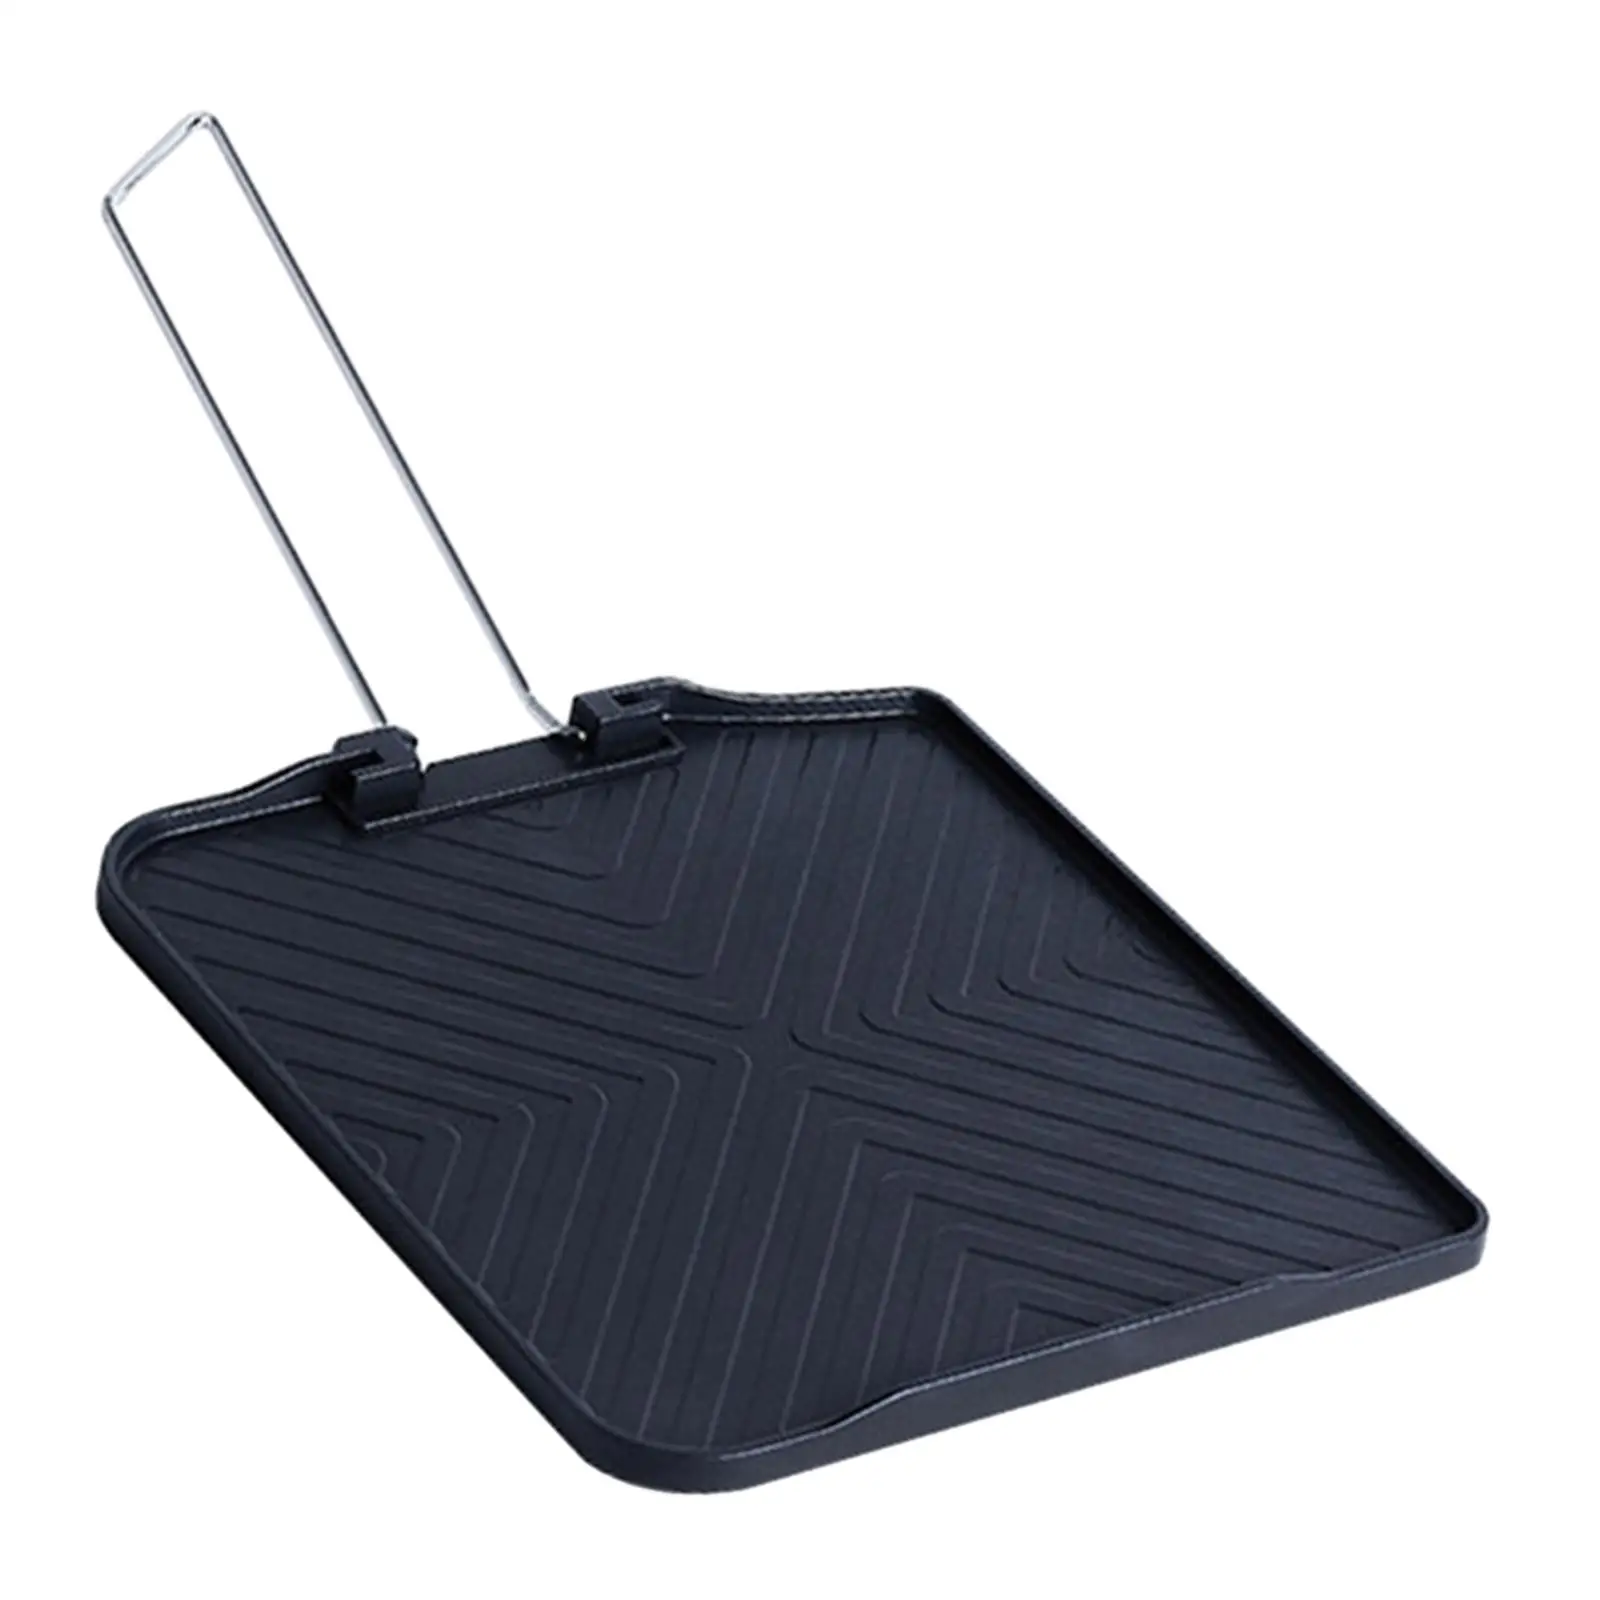 Camping Stove Grill Pans Square with Handle Nonstick Barbecue Plate Frying Pans BBQ Griddle Pans for Picnics Outdoor Barbecue